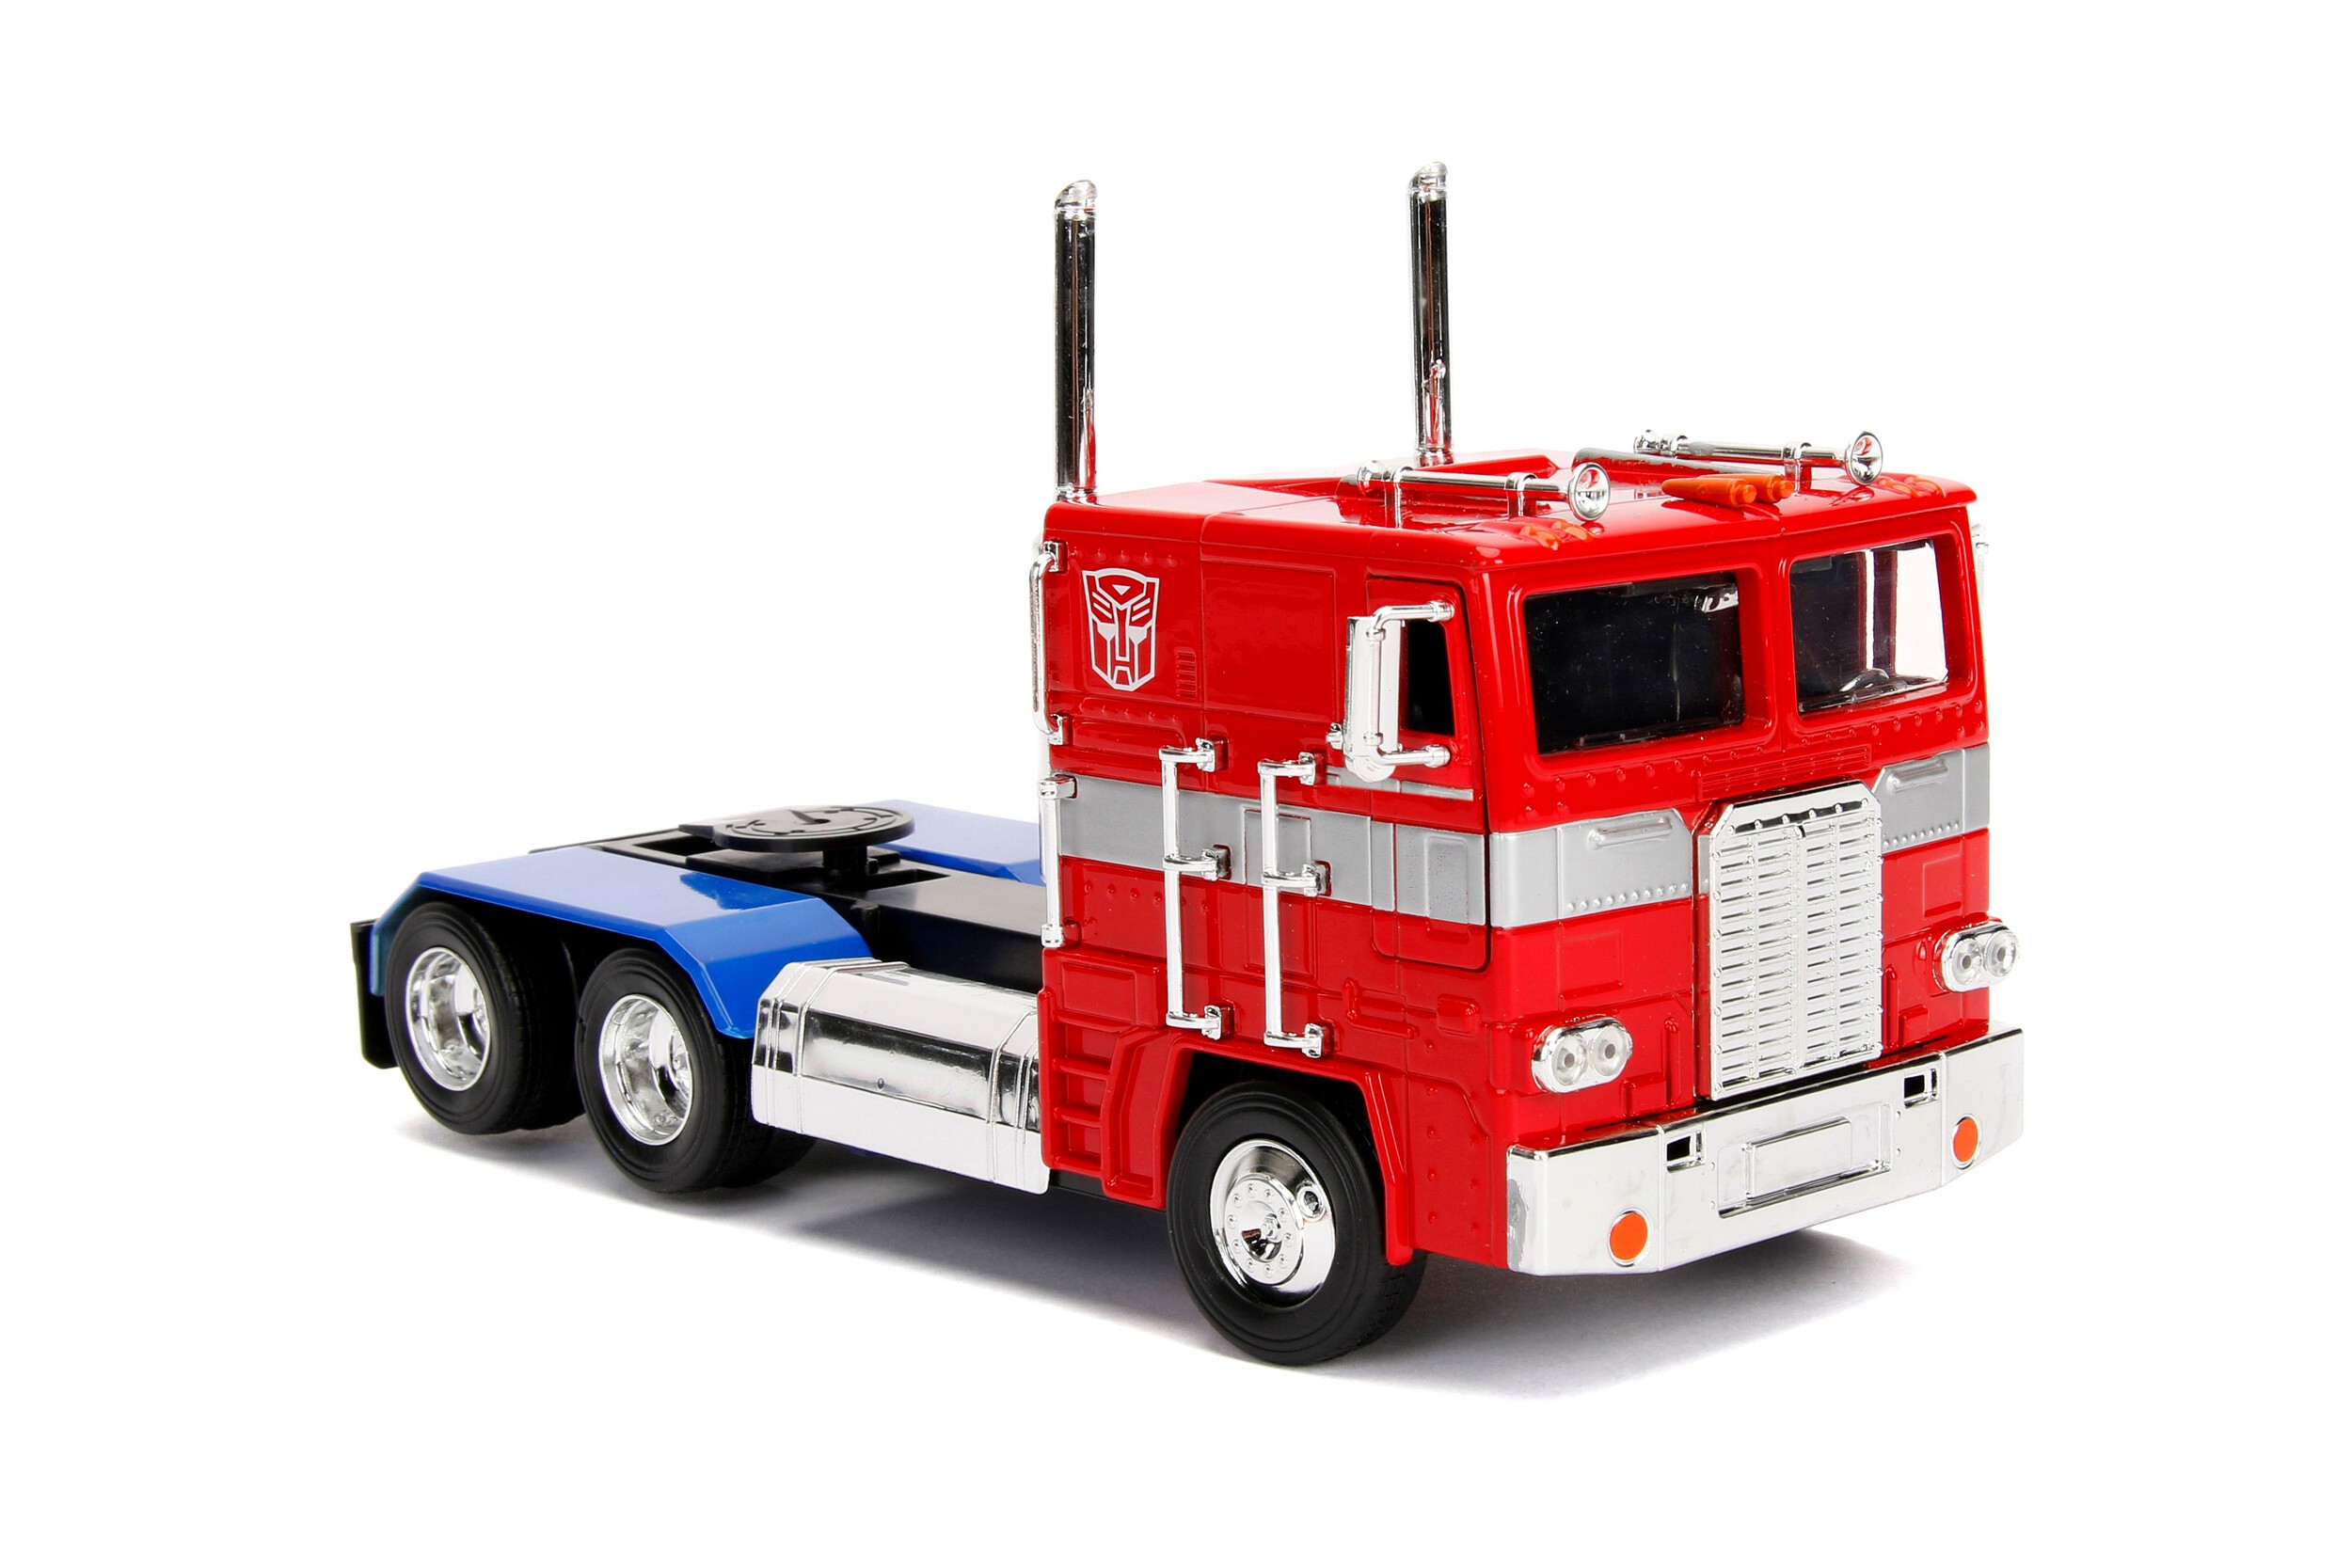 Transformers 7 - Optimus Prime 1:24 Scale Diecast Model Truck by Jada Toys